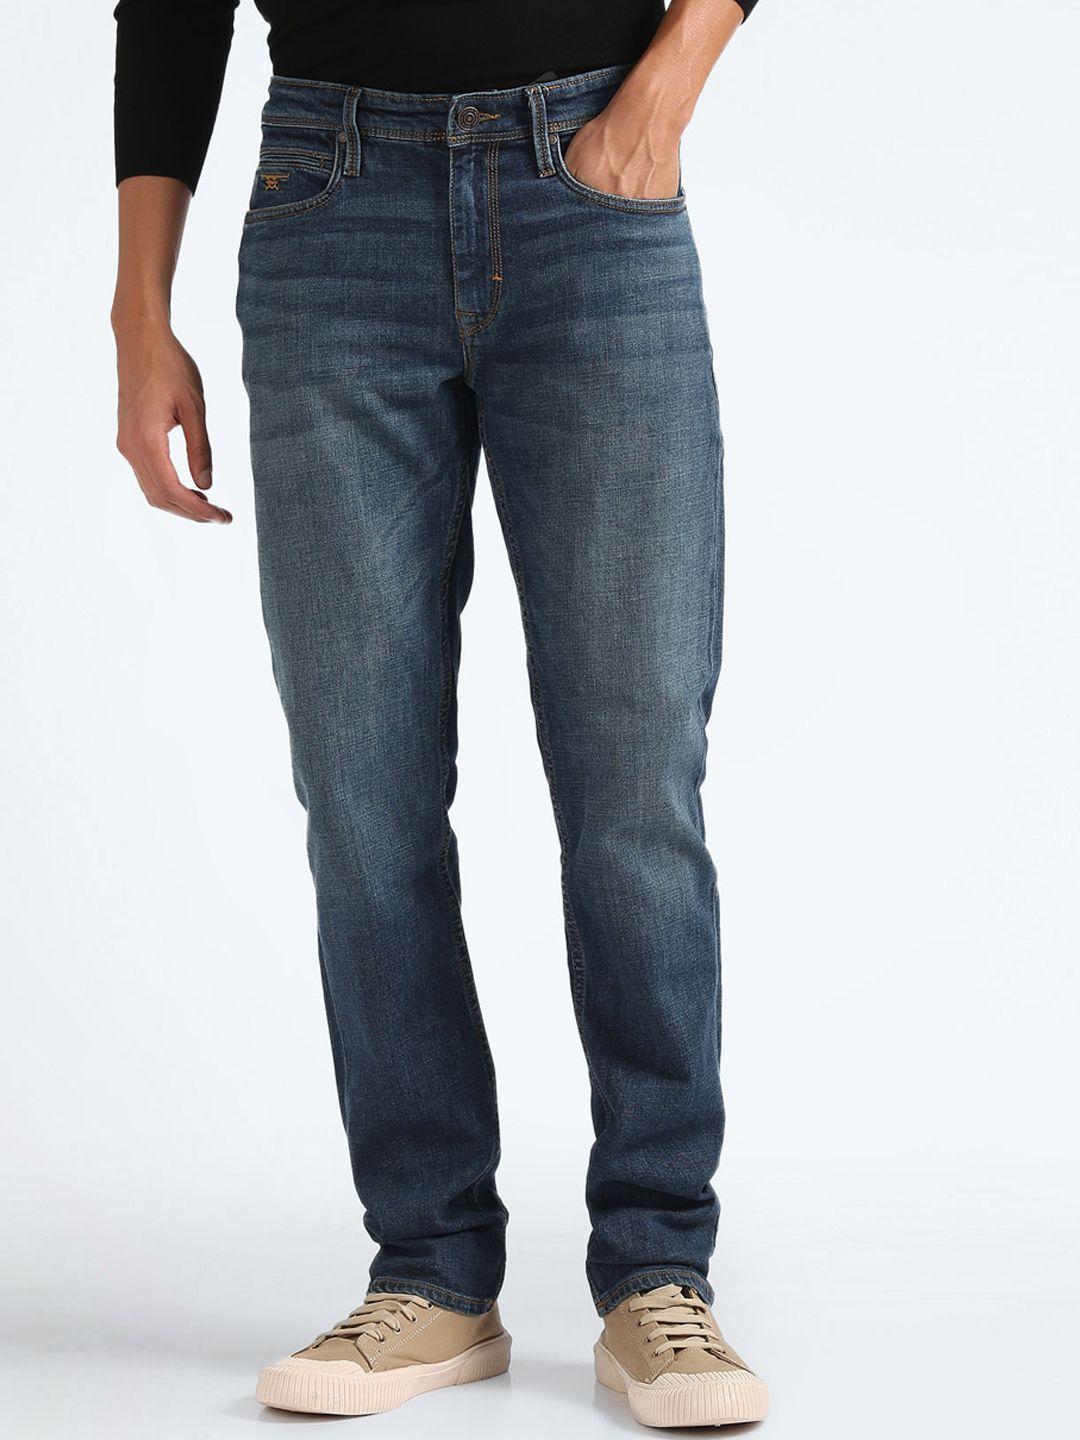 flying-machine-men-straight-fit-clean-look-light-fade-stretchable-jeans